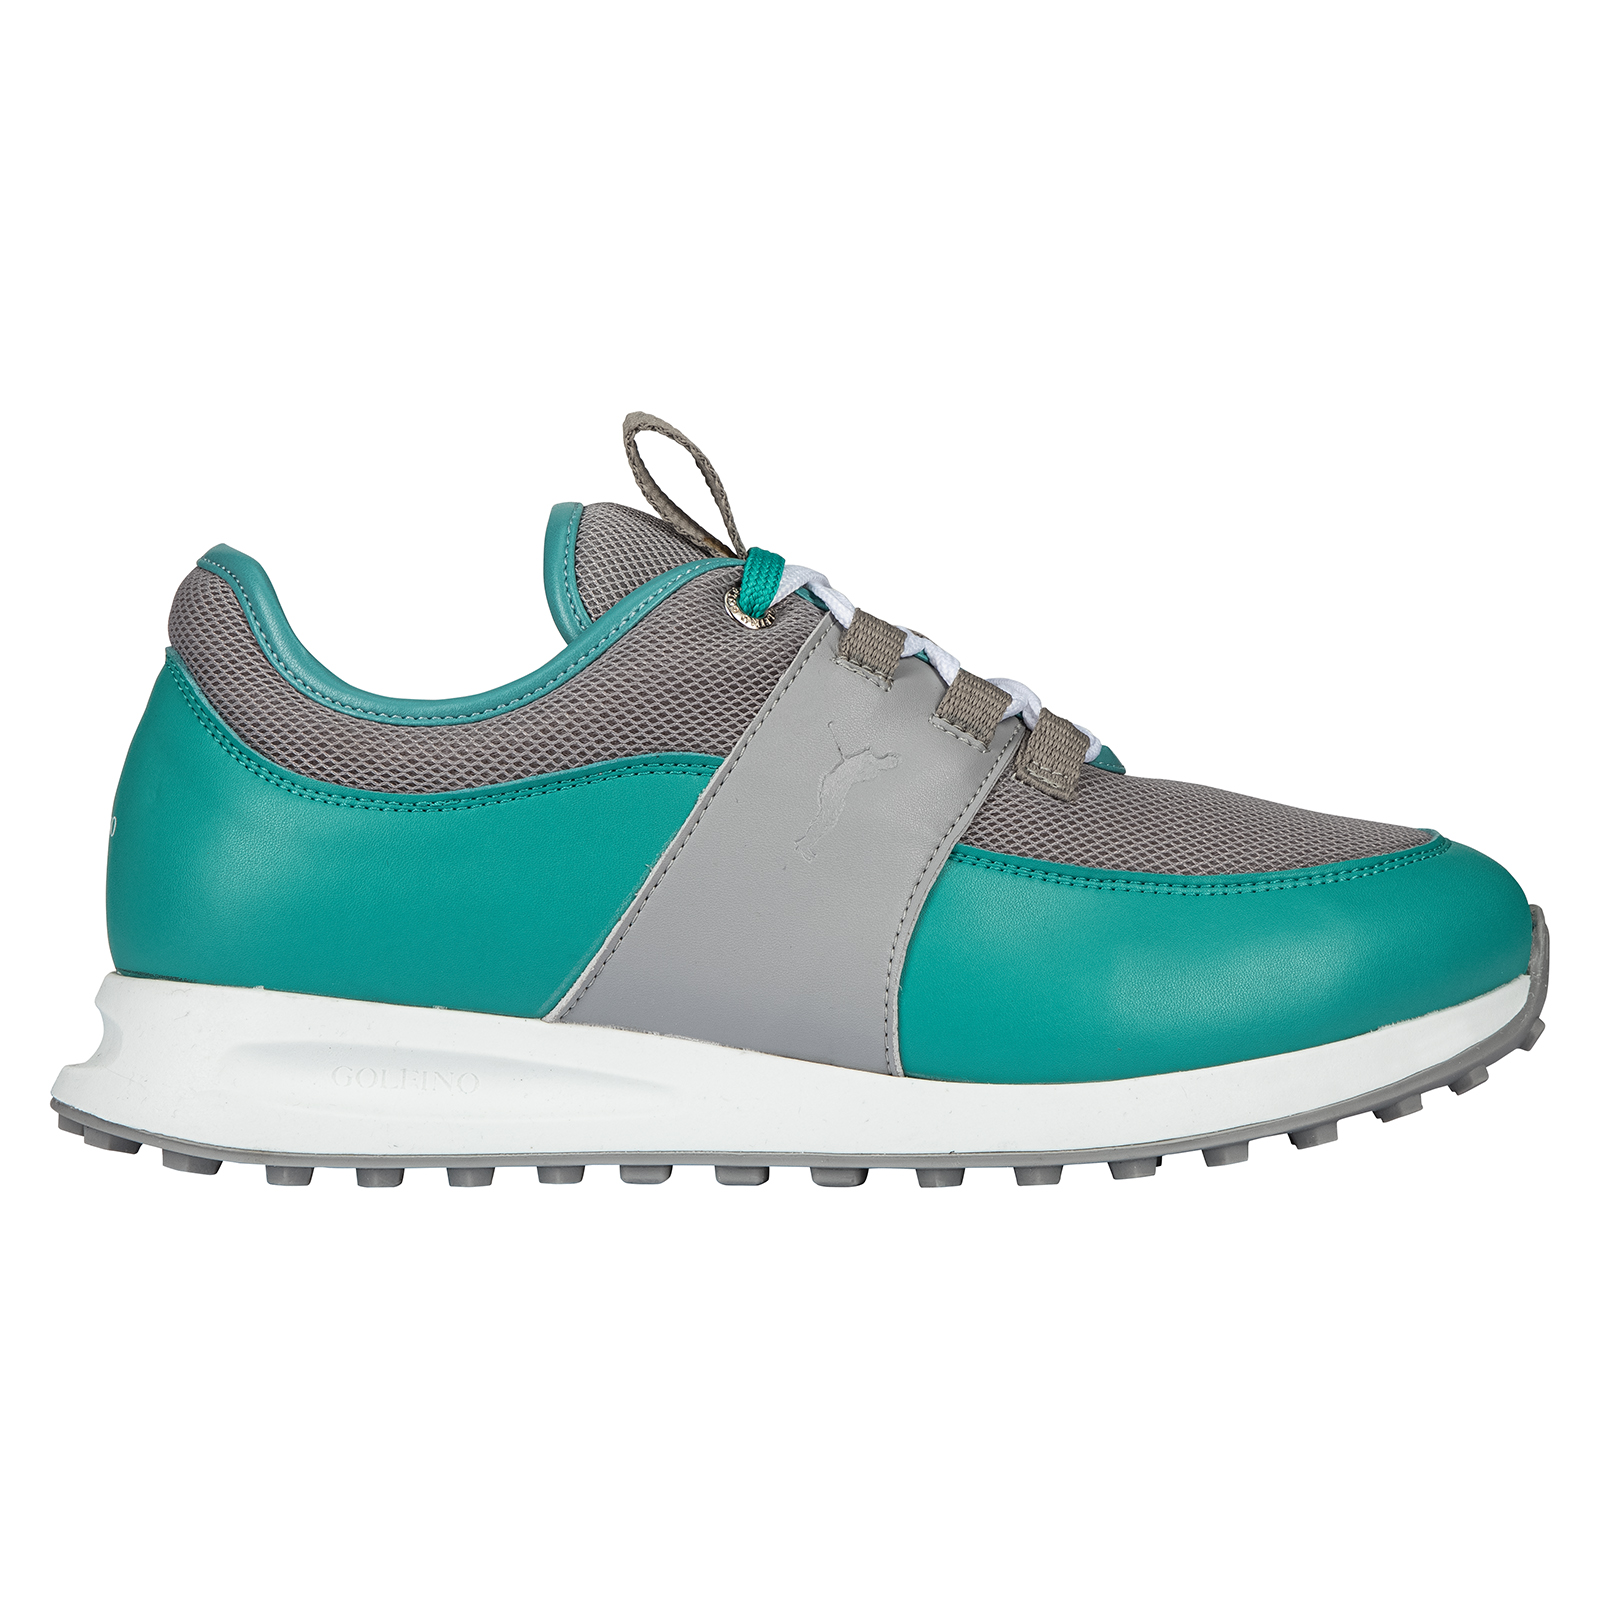 Attractive ladies golf shoes with mesh insert 